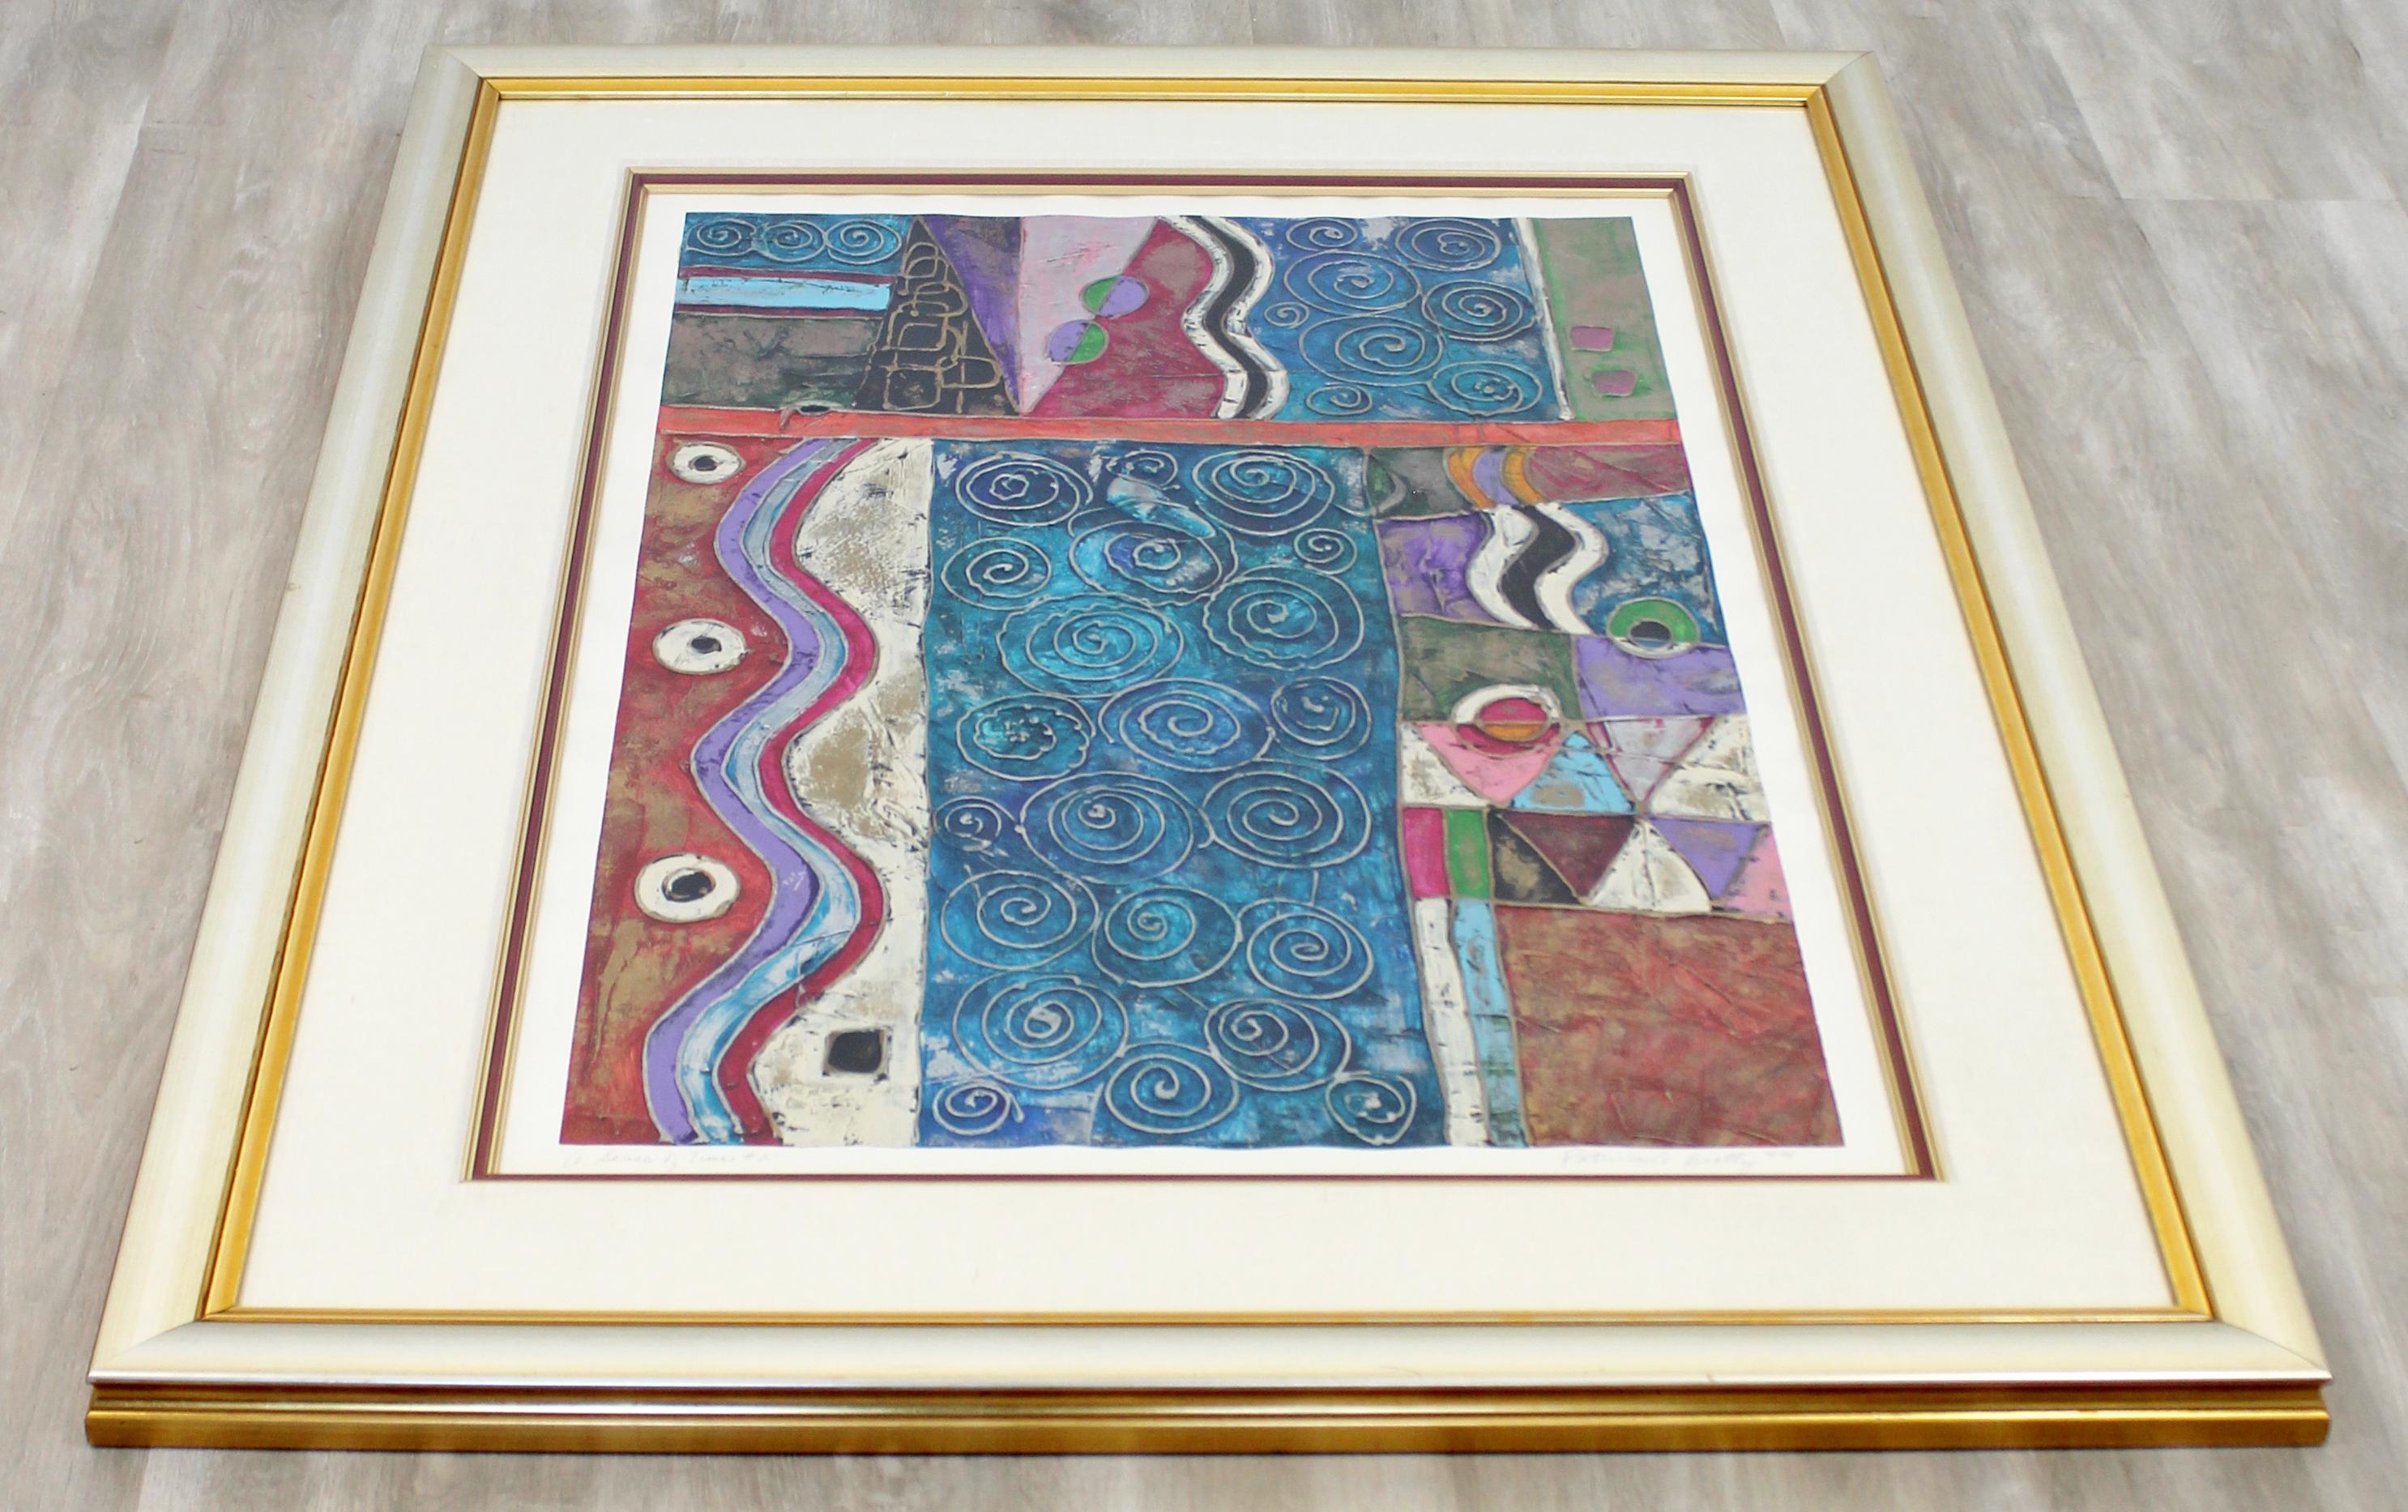 For your consideration is a magnificent, framed mixed-media painting, signed Patricia Beatty and dated 1994. In excellent condition. The dimensions of the frame are 39